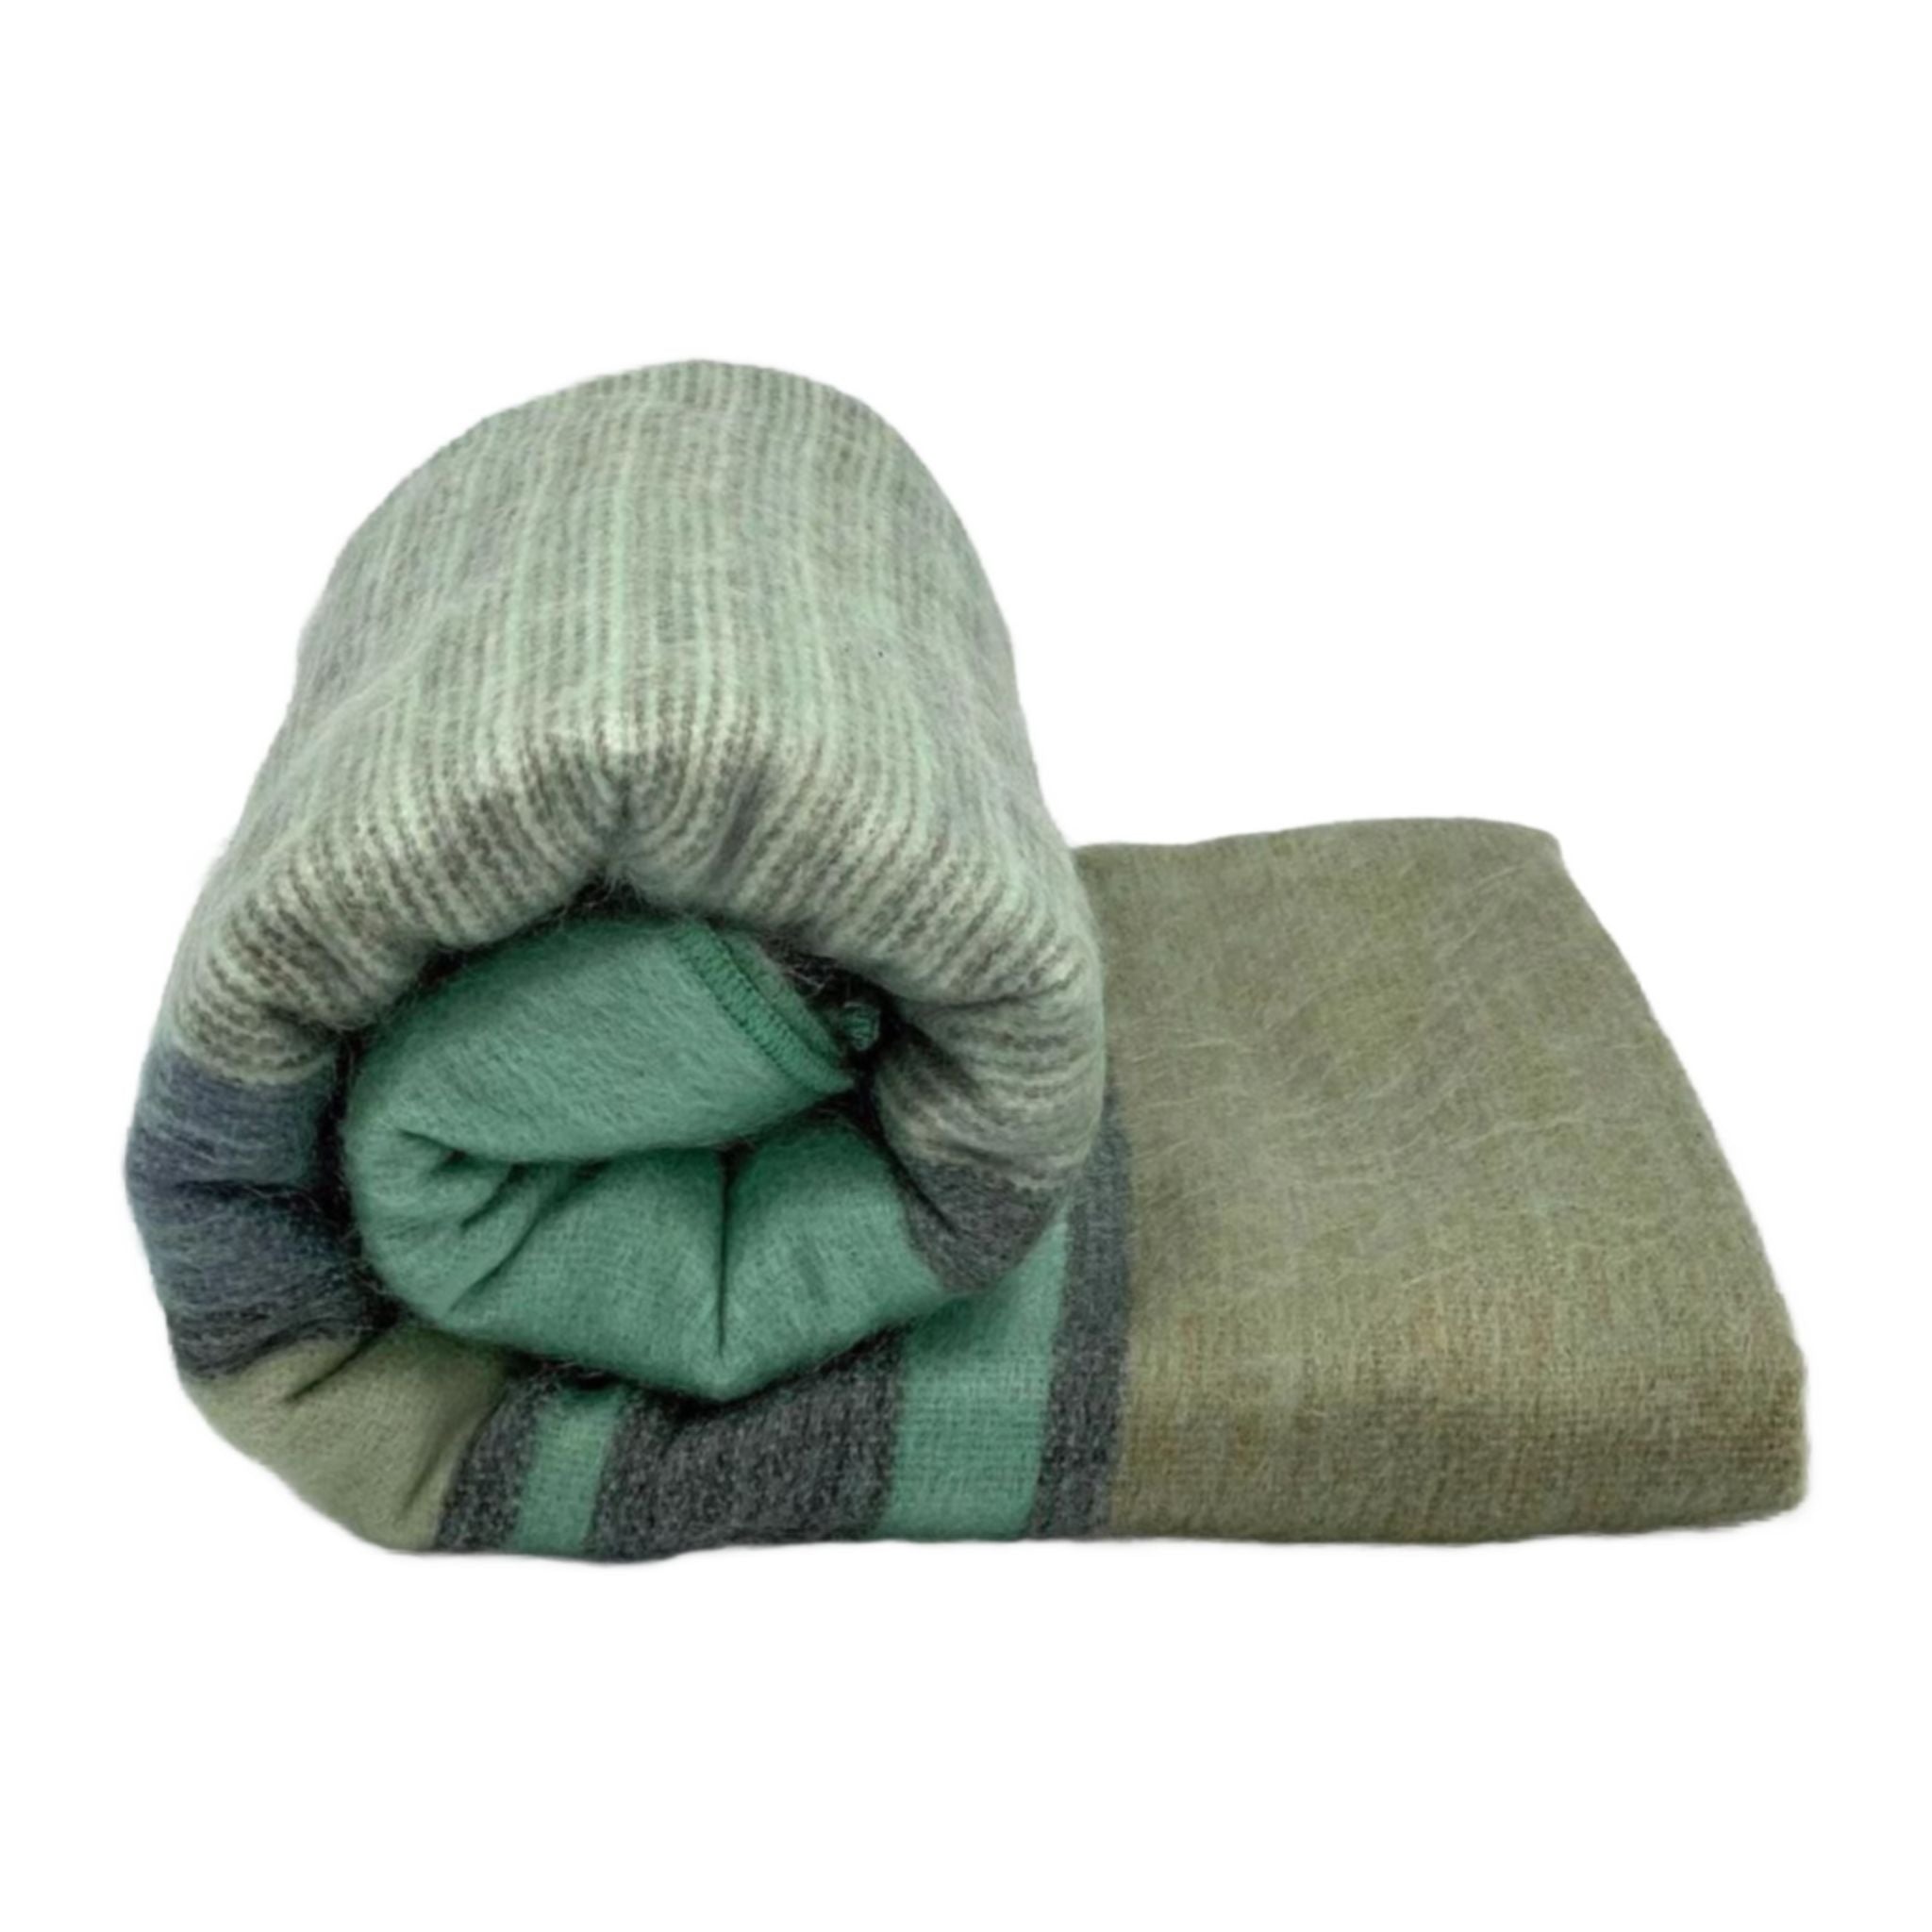 Simply Elevated - This beautiful alpaca wool blanket will keep you warm and cozy even on the coldest nights plus give your space a touch of class. Alpaca blankets are the finest in the world. It is incredibly soft and warm. Throw it over your couch, armchair or bed for a beautiful accent.